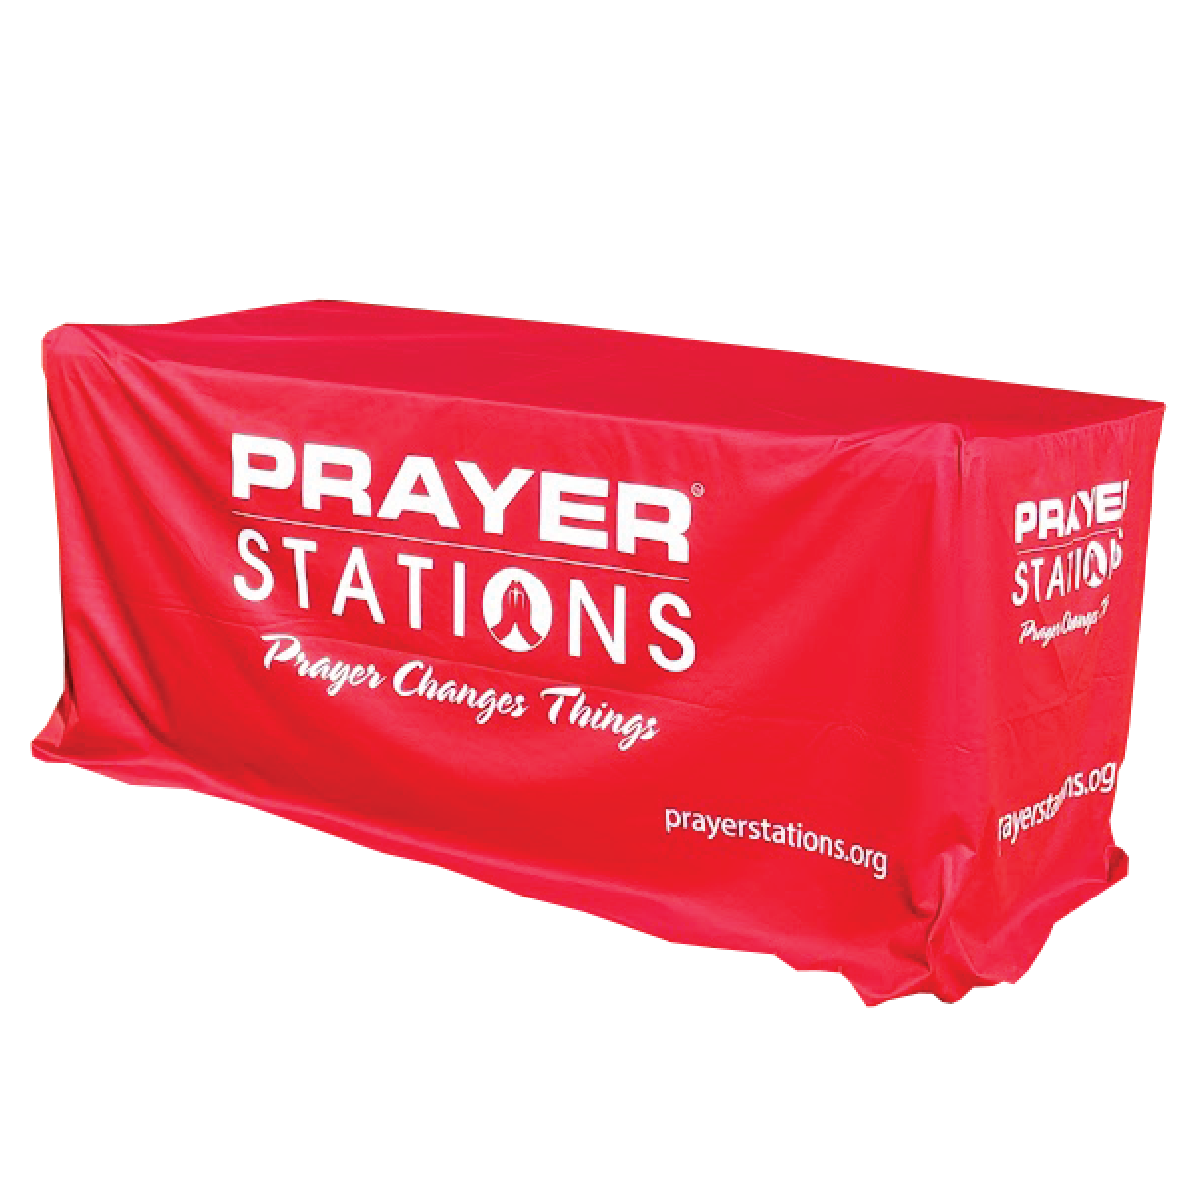 Prayer Station® Table with Table Cover